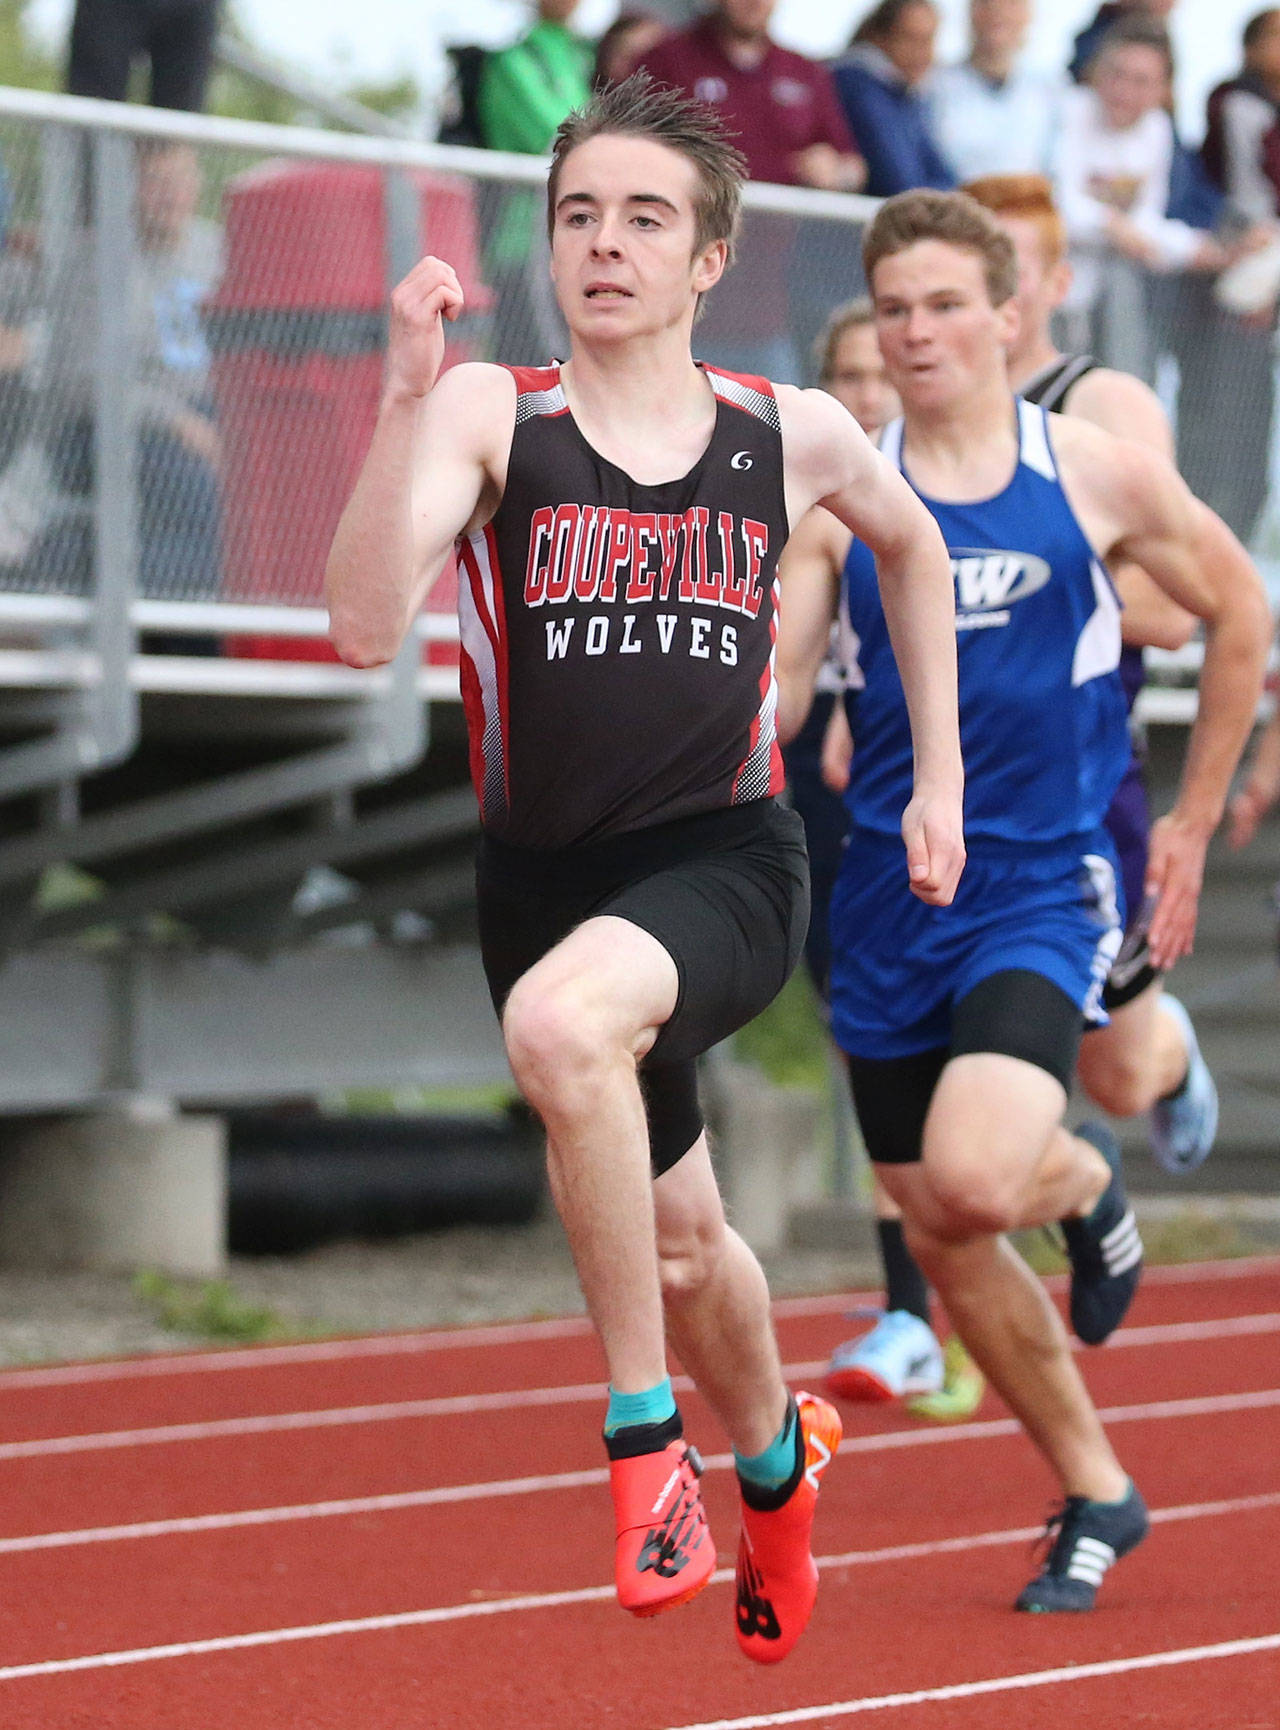 Danny Conlisk has developed into one of the state’s fastest 1A sprinters this spring. (Photo by John Fisken)